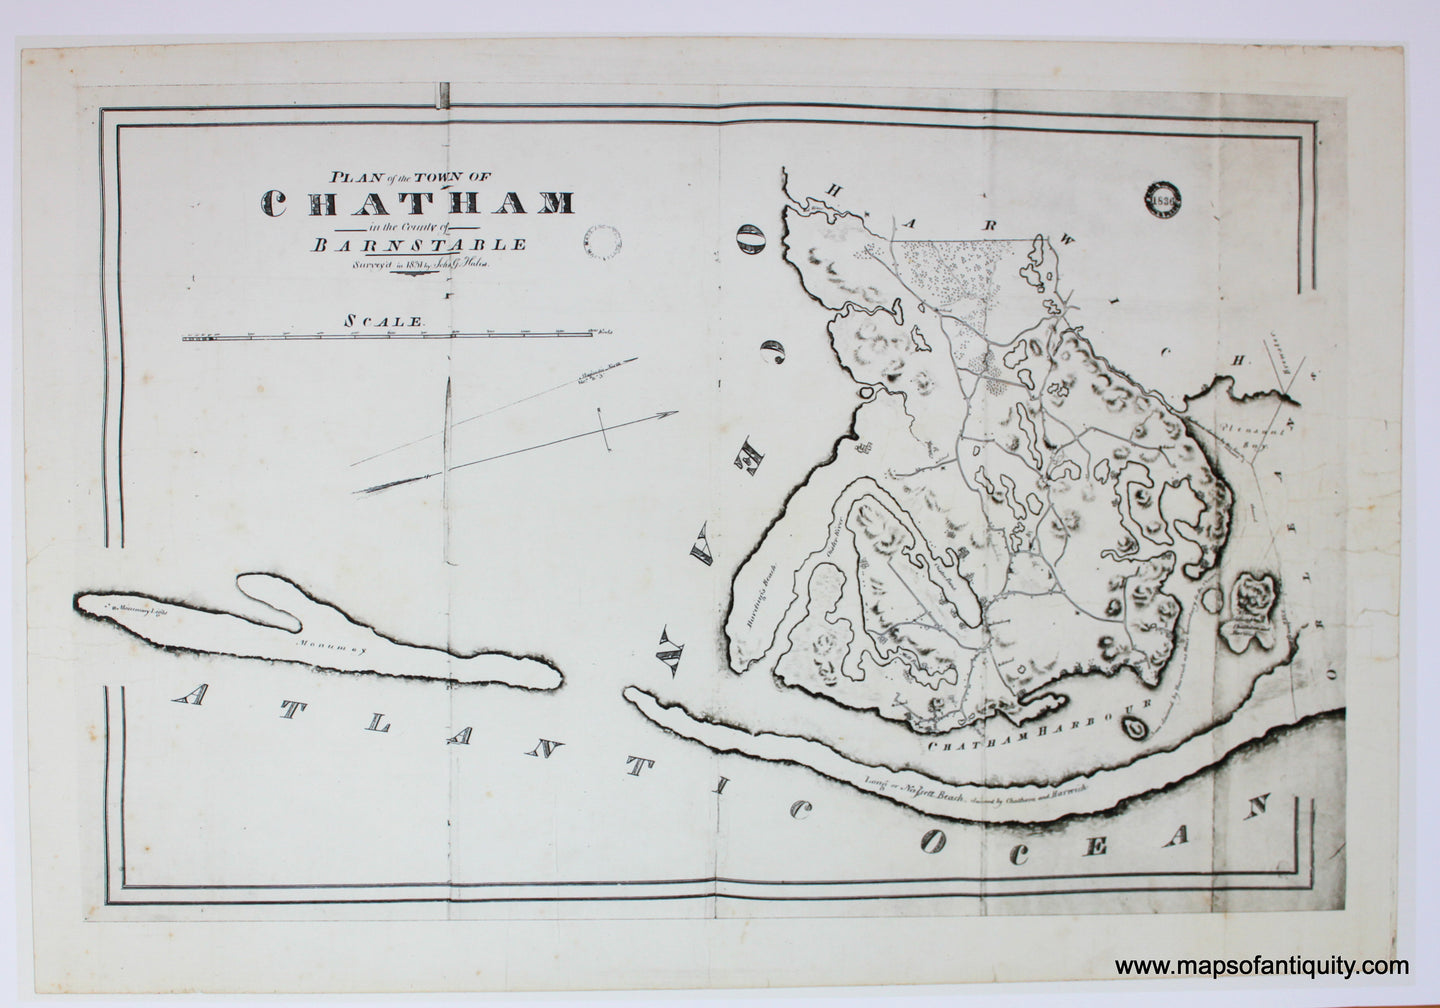 Reproduction-Map-Plan-of-the-Town-of-Chatham-in-the-County-of-Barnstable-Surveyed-in-1831-by-John-Hales-Maps-of-Antiquity